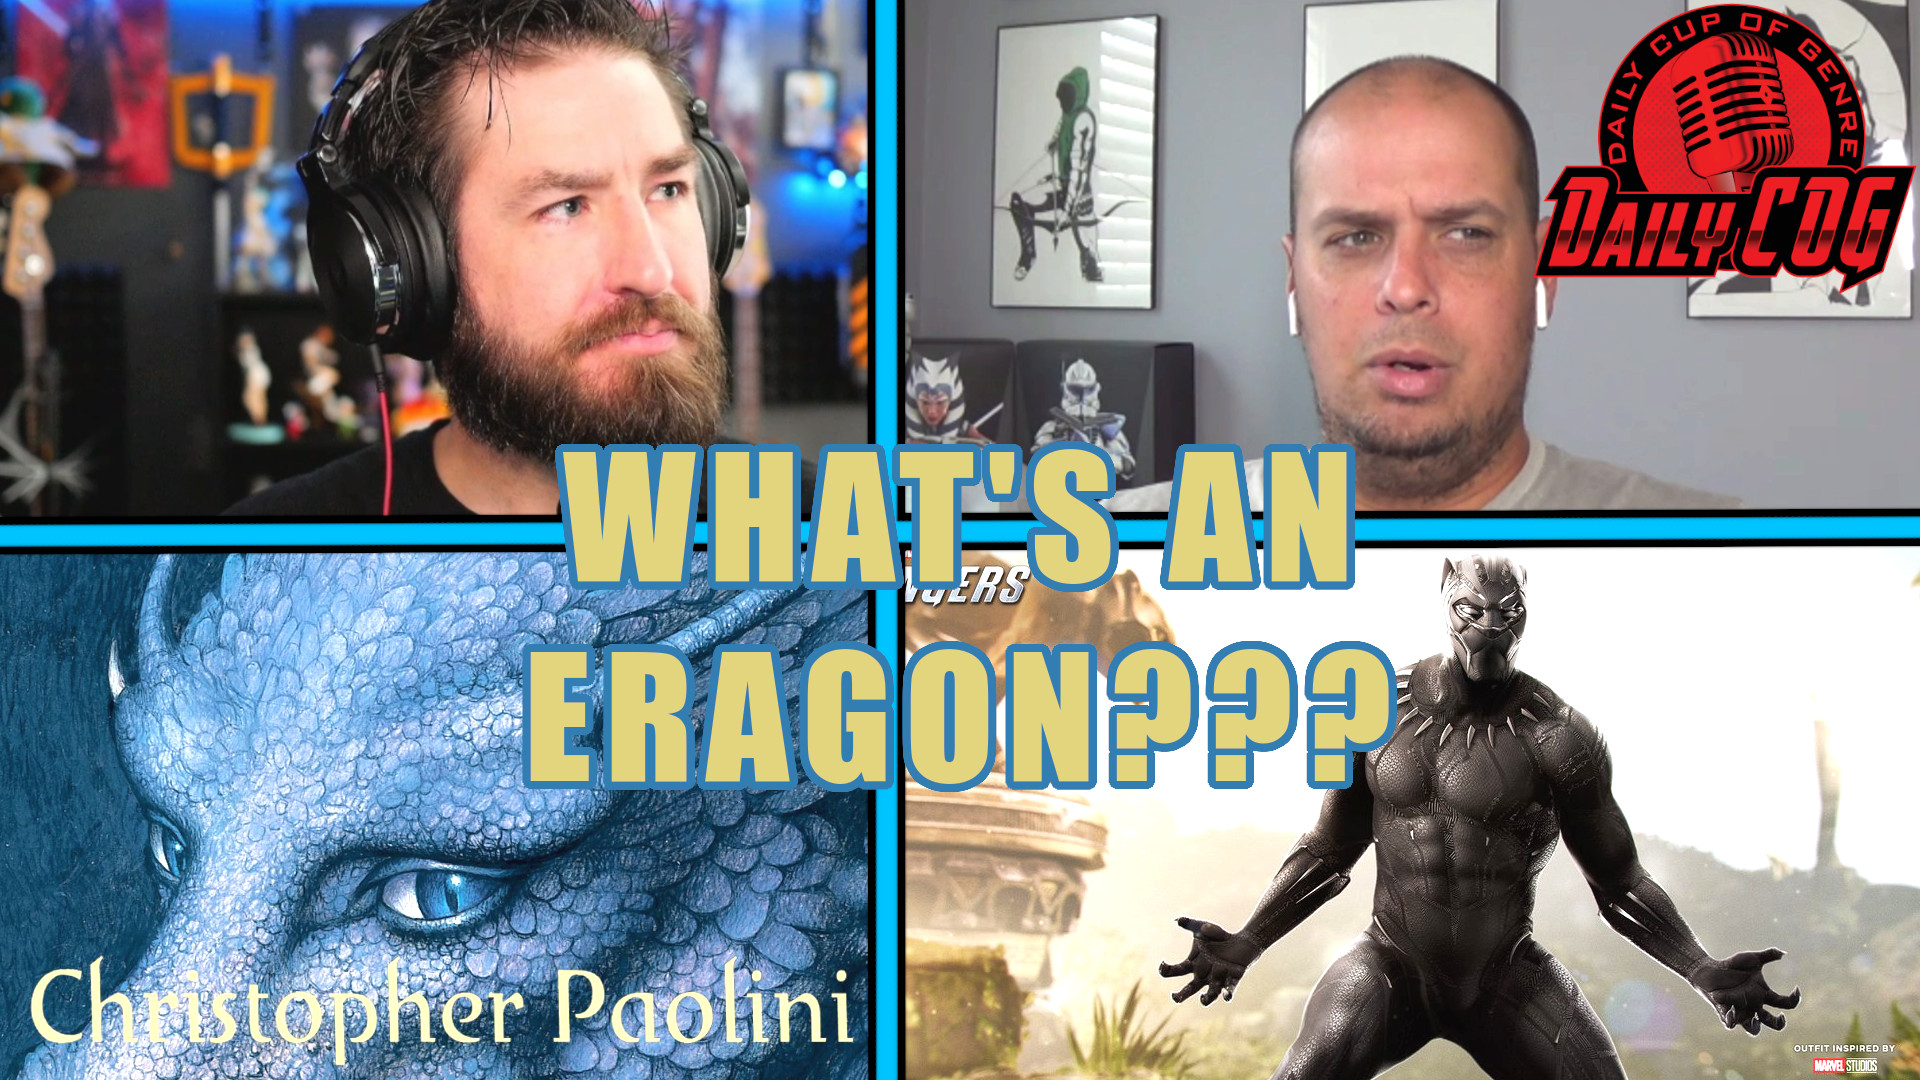 Daily COG hosts Kyle and Shockey look confused next to images of Black Panther's game character for Marvel's Avengers and the cover of the Eragon novel featuring a blue dragon.